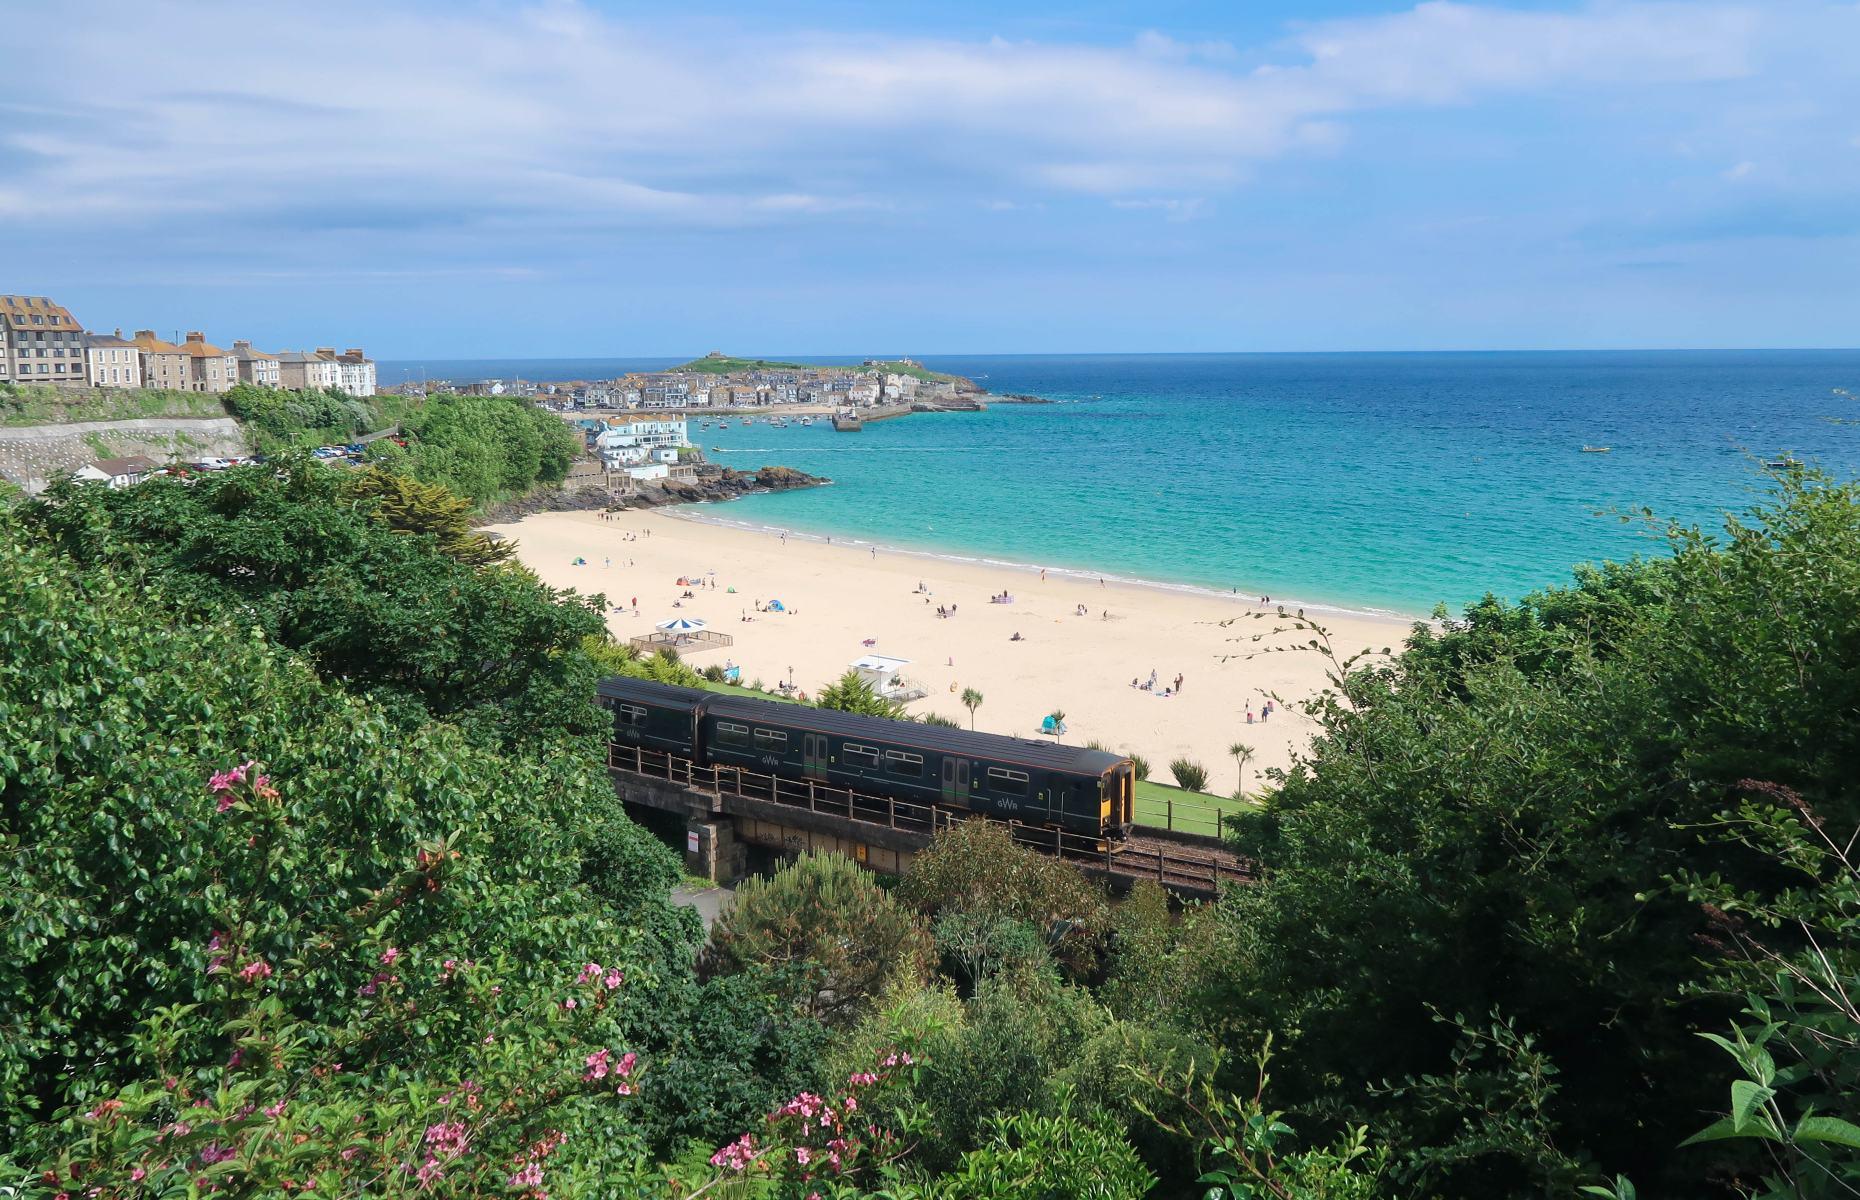 <p>Sweeping along Cornwall’s spectacular coastline, this 4.25 mile (6.8km) route is arguably one of the most beautiful train rides of its kind in England. In just 15 minutes, <a href="https://www.stives.co.uk/st-ives-bay-line">the railway</a> travels from St Erth past the sparkling sands and eye-popping blue waters of Carbis Bay and Hayle Towans before arriving at the popular seaside town of St Ives. With its close proximity to the beaches, the train provides unobstructed views across the coast.</p>